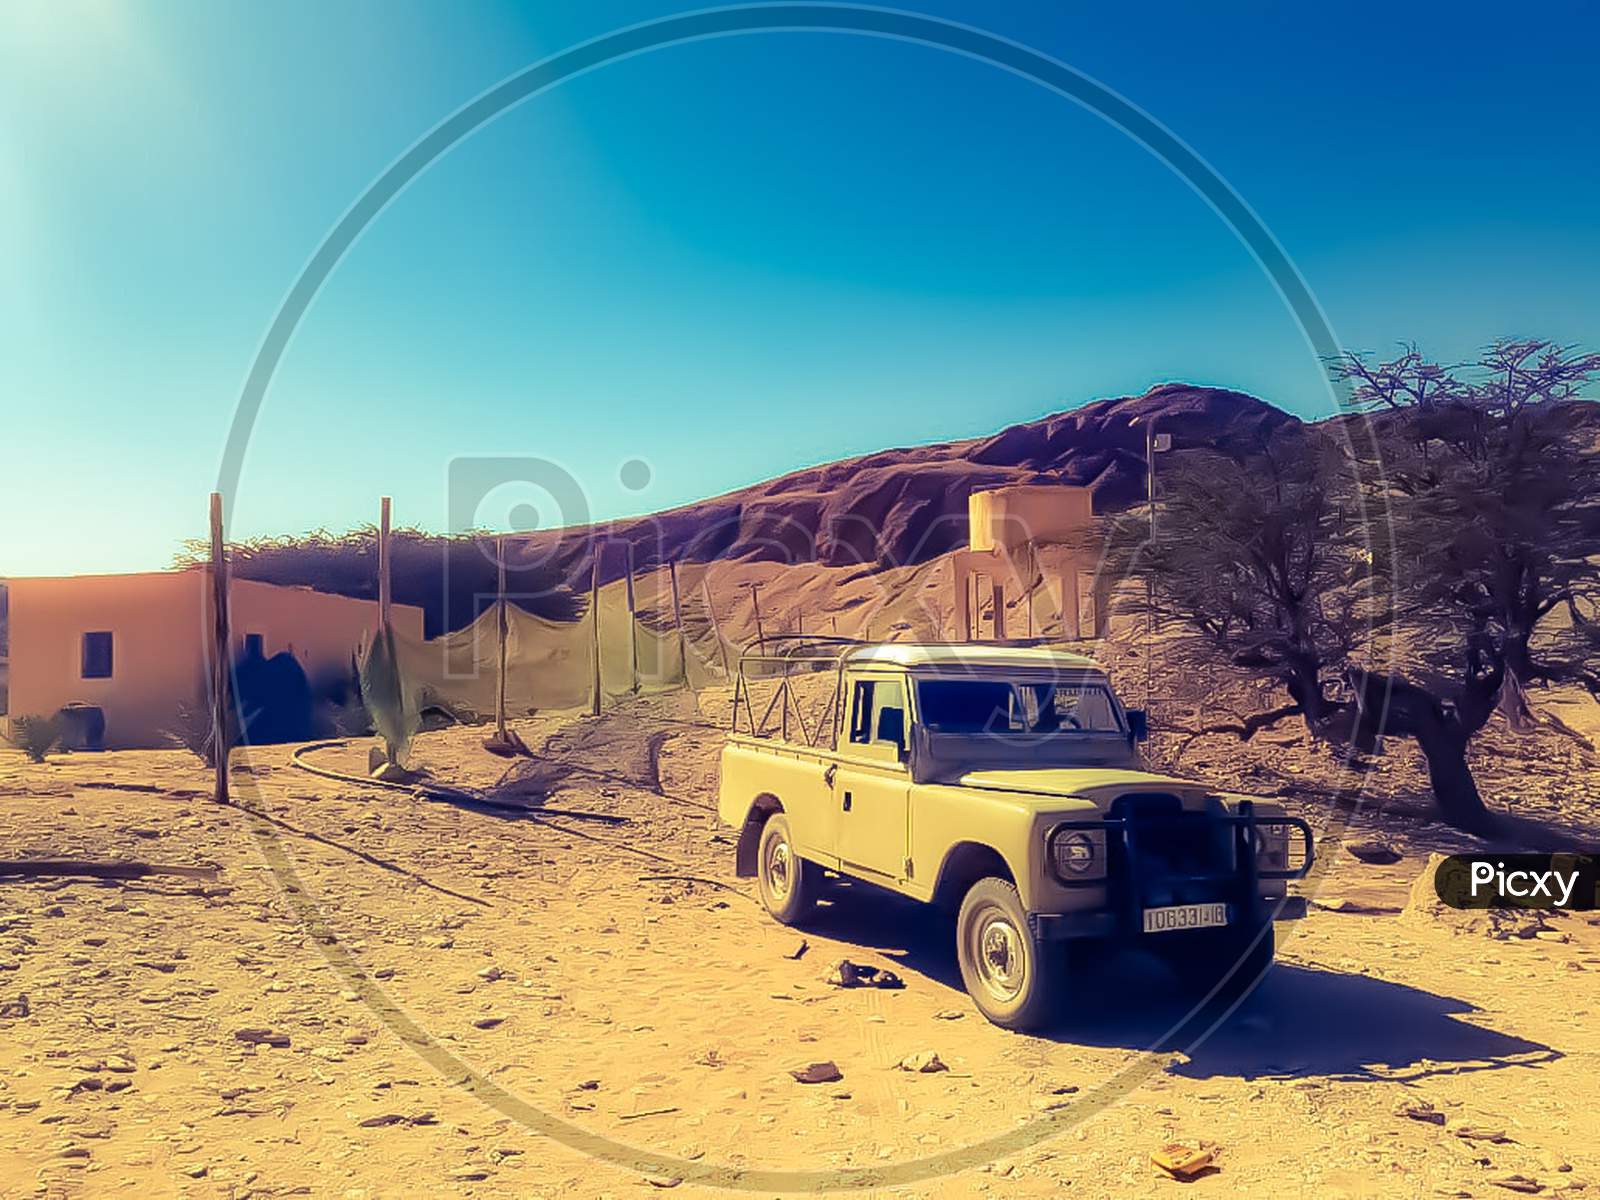 View of an old pickup in desert transporting goods.